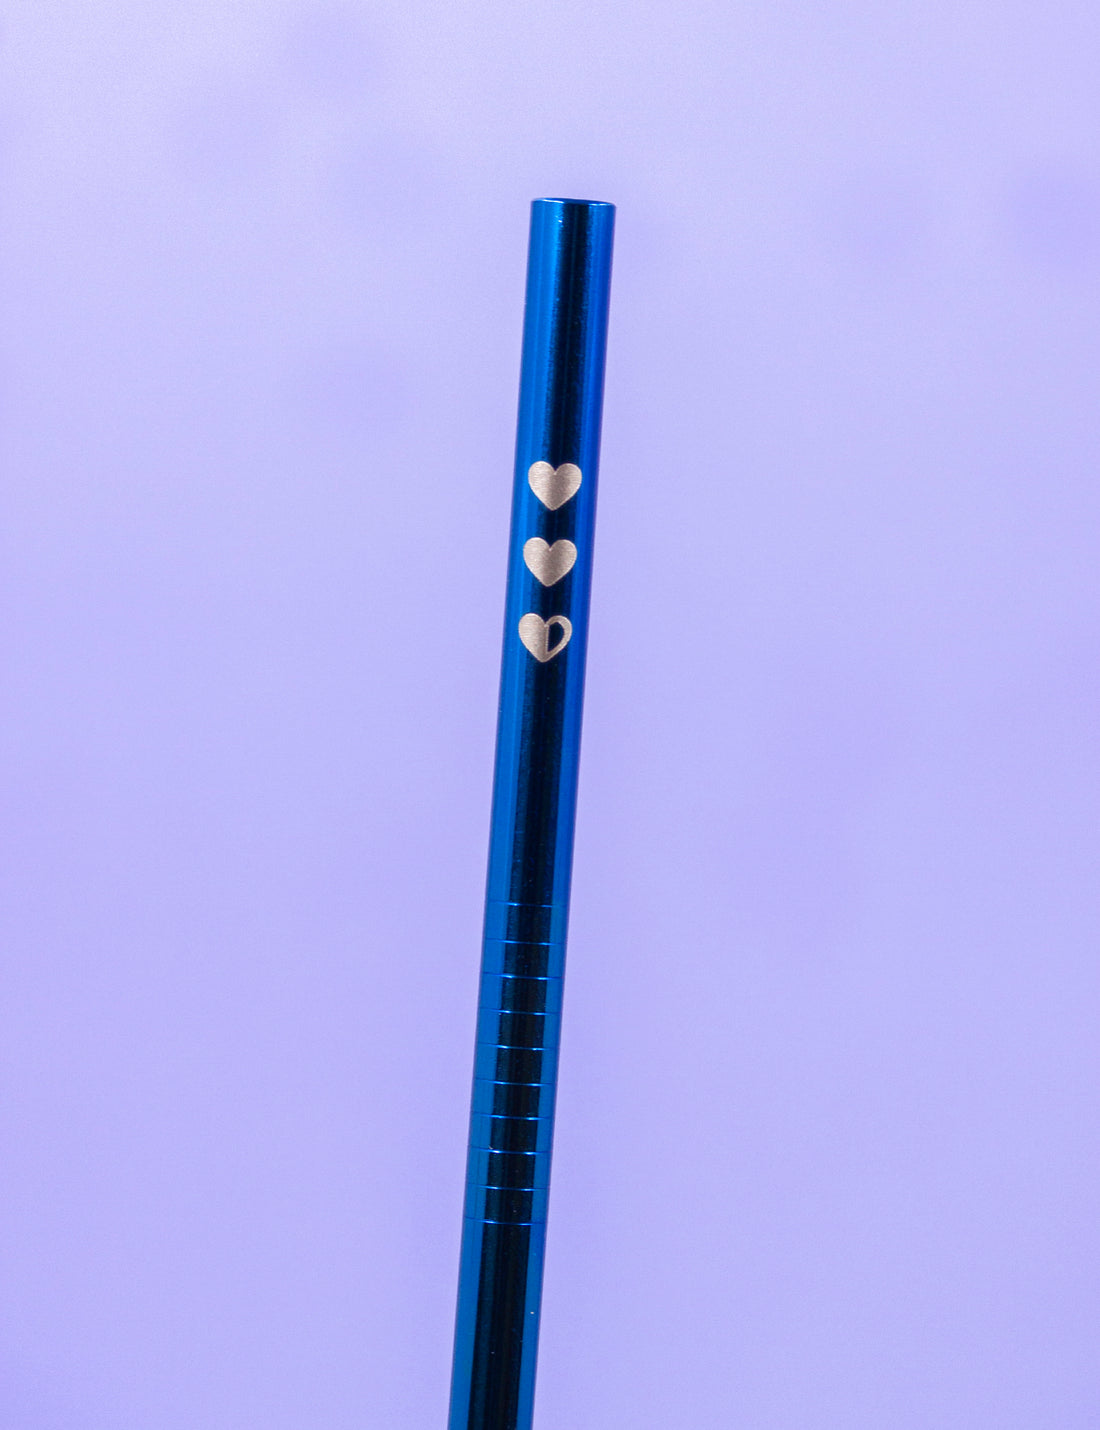 Life hearts - Stainless steel long Straws